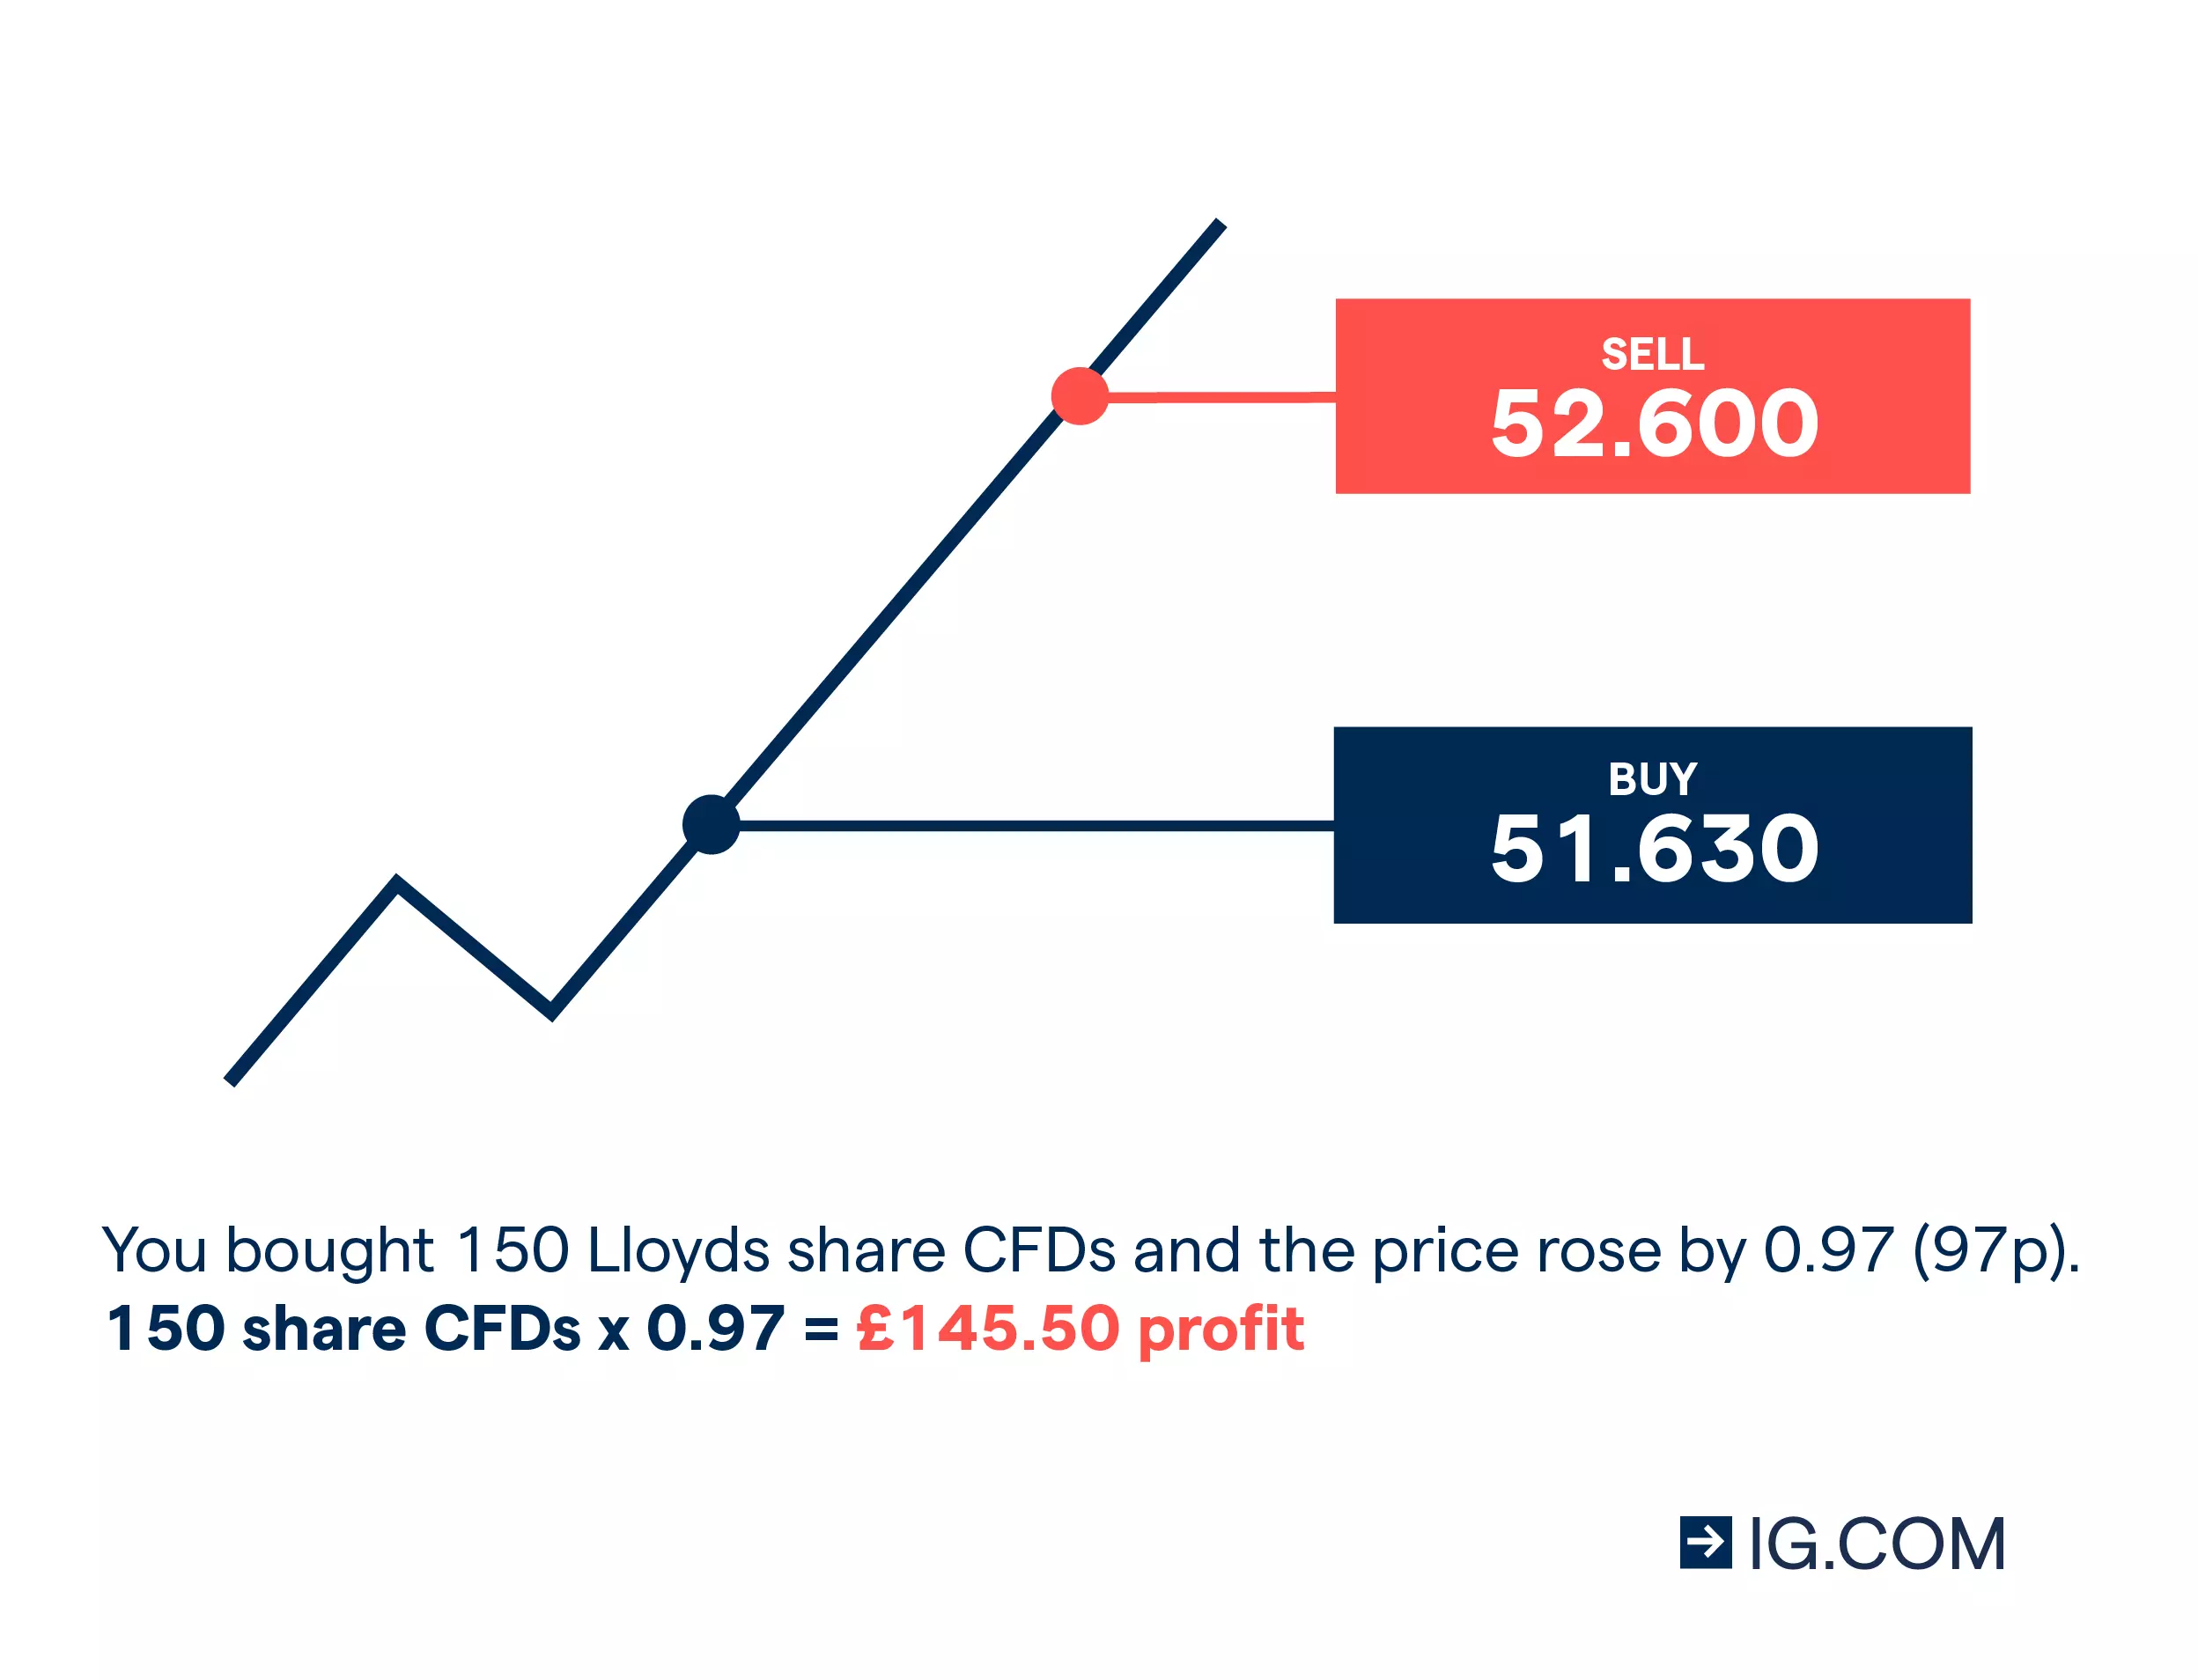 CFD trading example: Lloyds shares profit